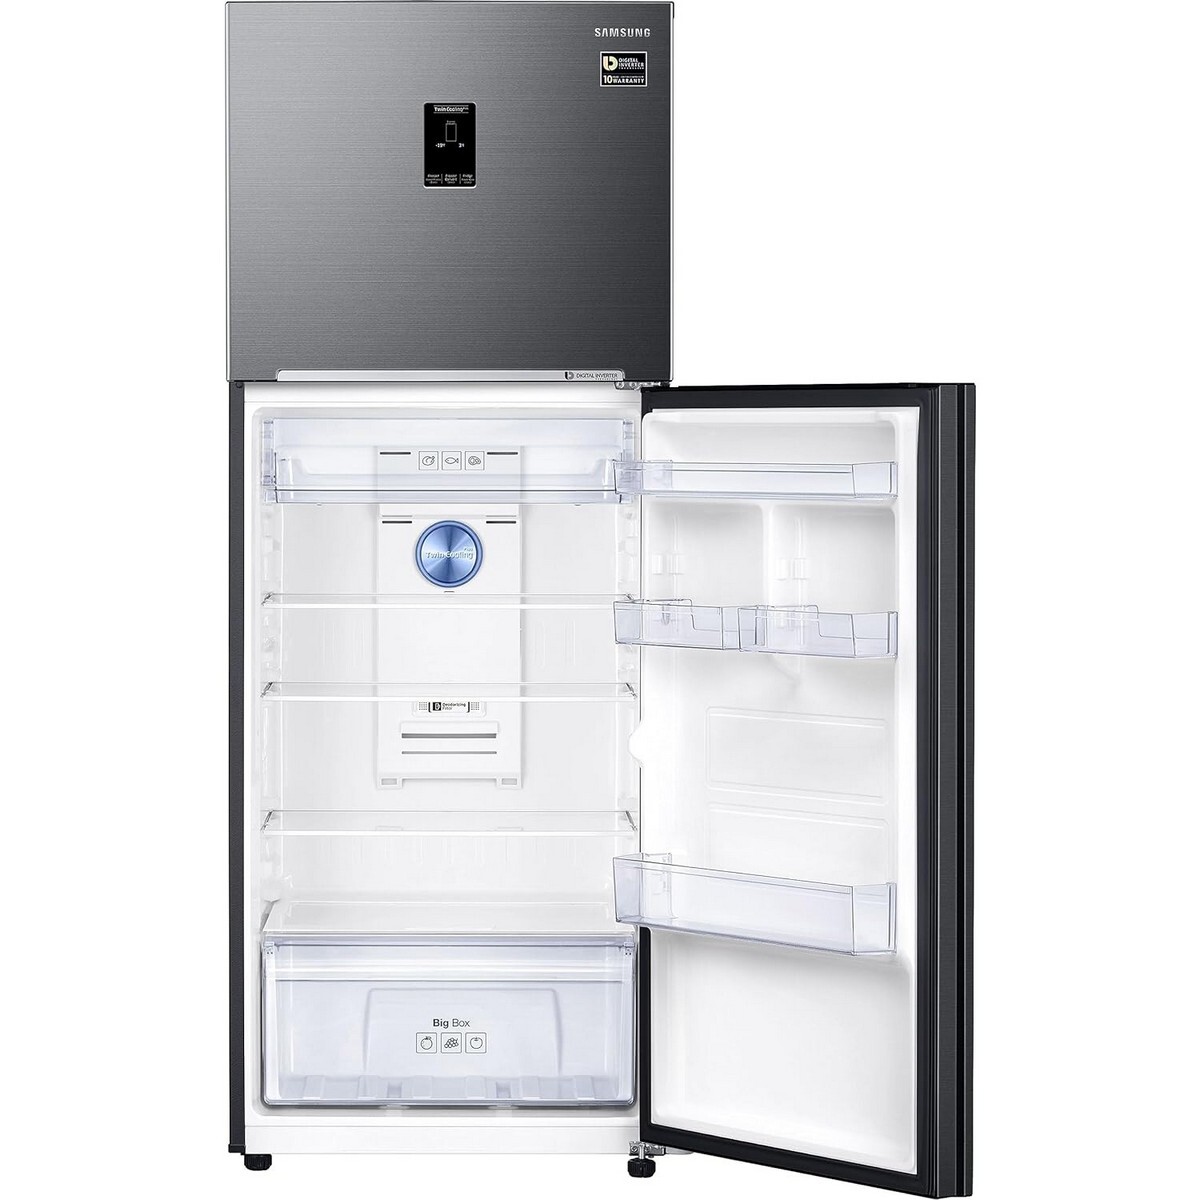 Samsung Twin Cooling Plus Double Door Refrigerator RT42C553EBX/HL 385L